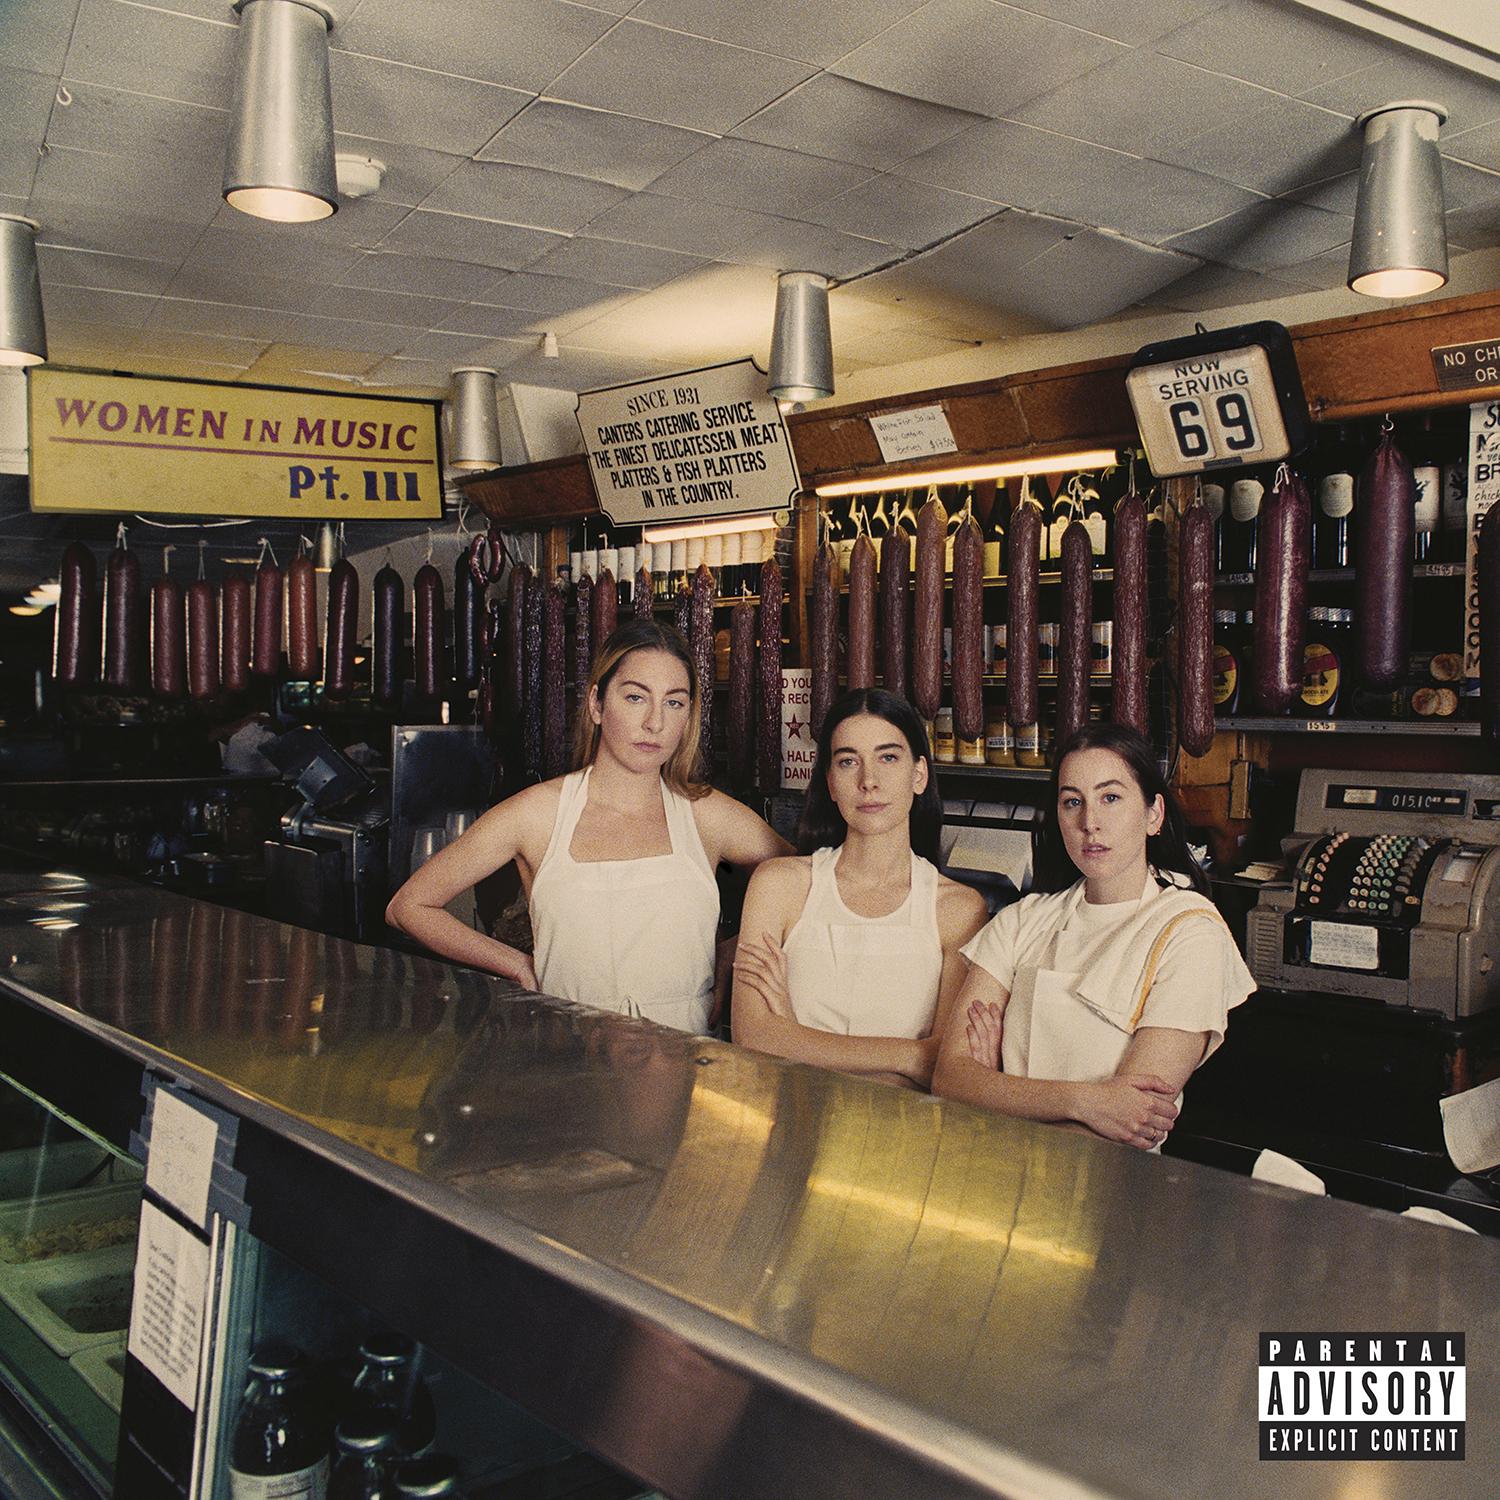 Women In Music Pt. III by Haim, album review by Adam Fink for Northern Transmissions